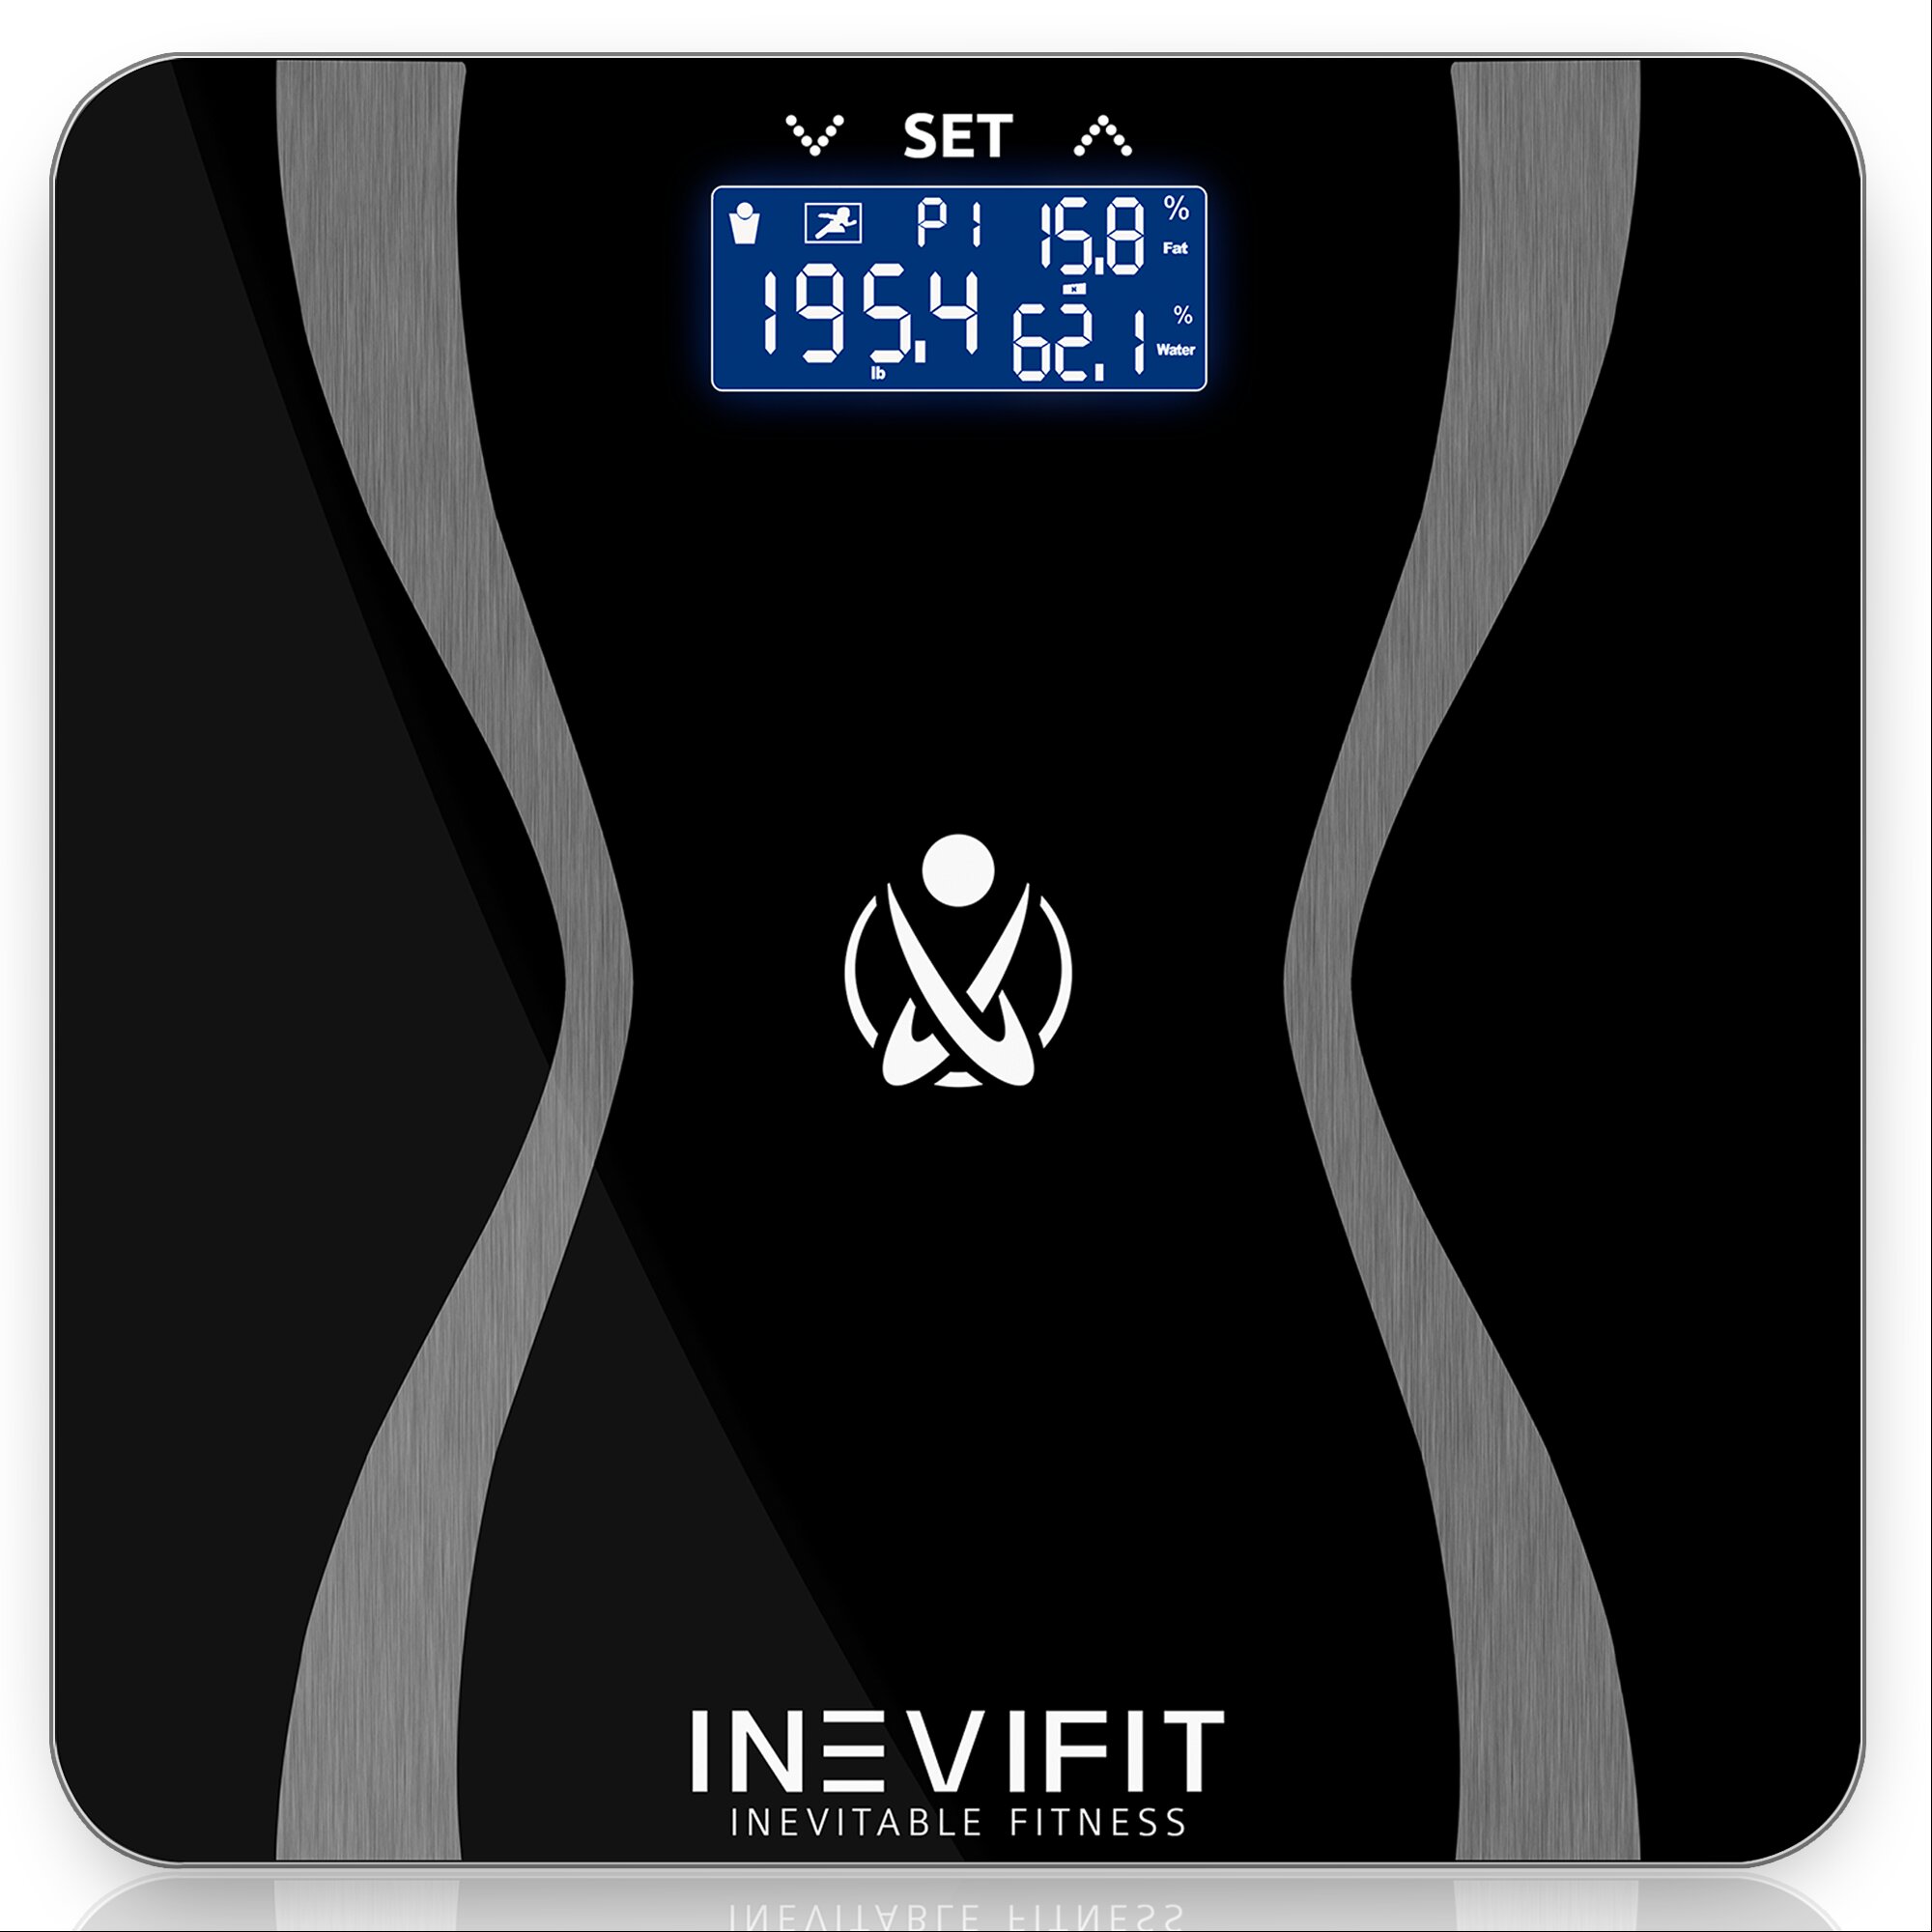 Eat Smart Precision Digital Bathroom Scale, 550 lb High Capacity Scale,  Extra Wide Platform, Bath Scale for Body Weight, Black